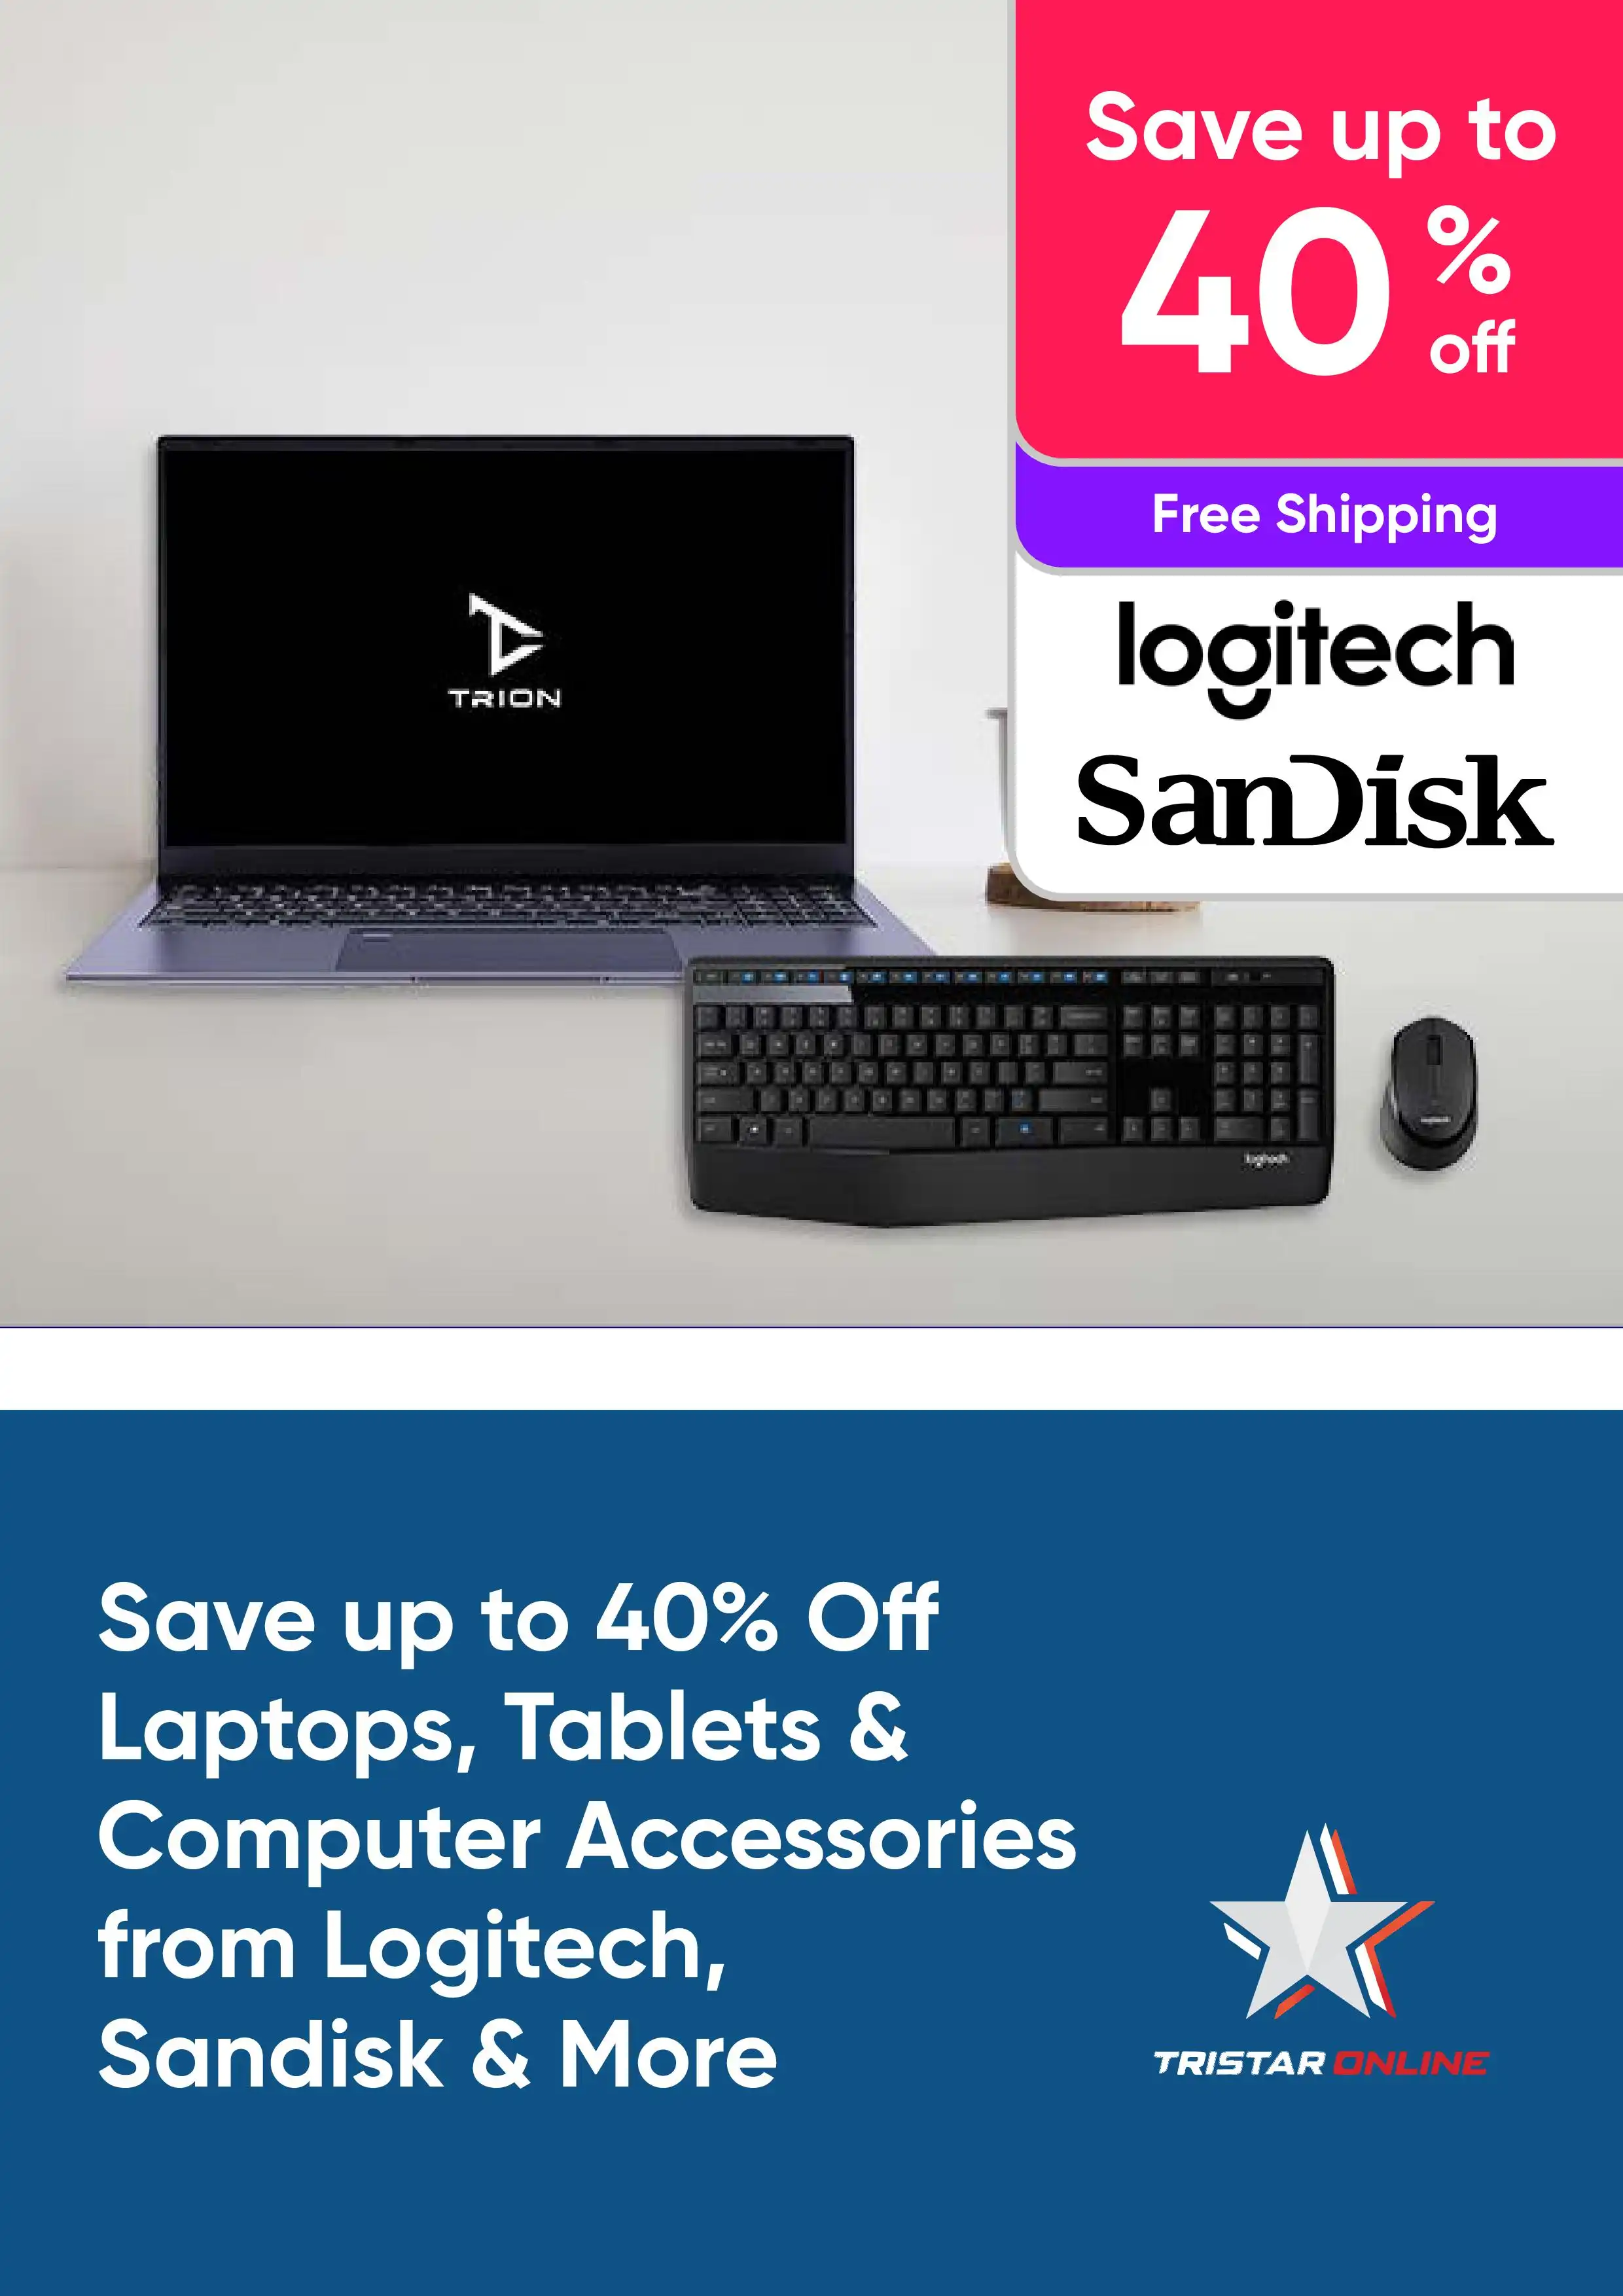 Save up to 40% Off Laptops, Tablets & Computer Accessories from Logitech, Sandisk & more